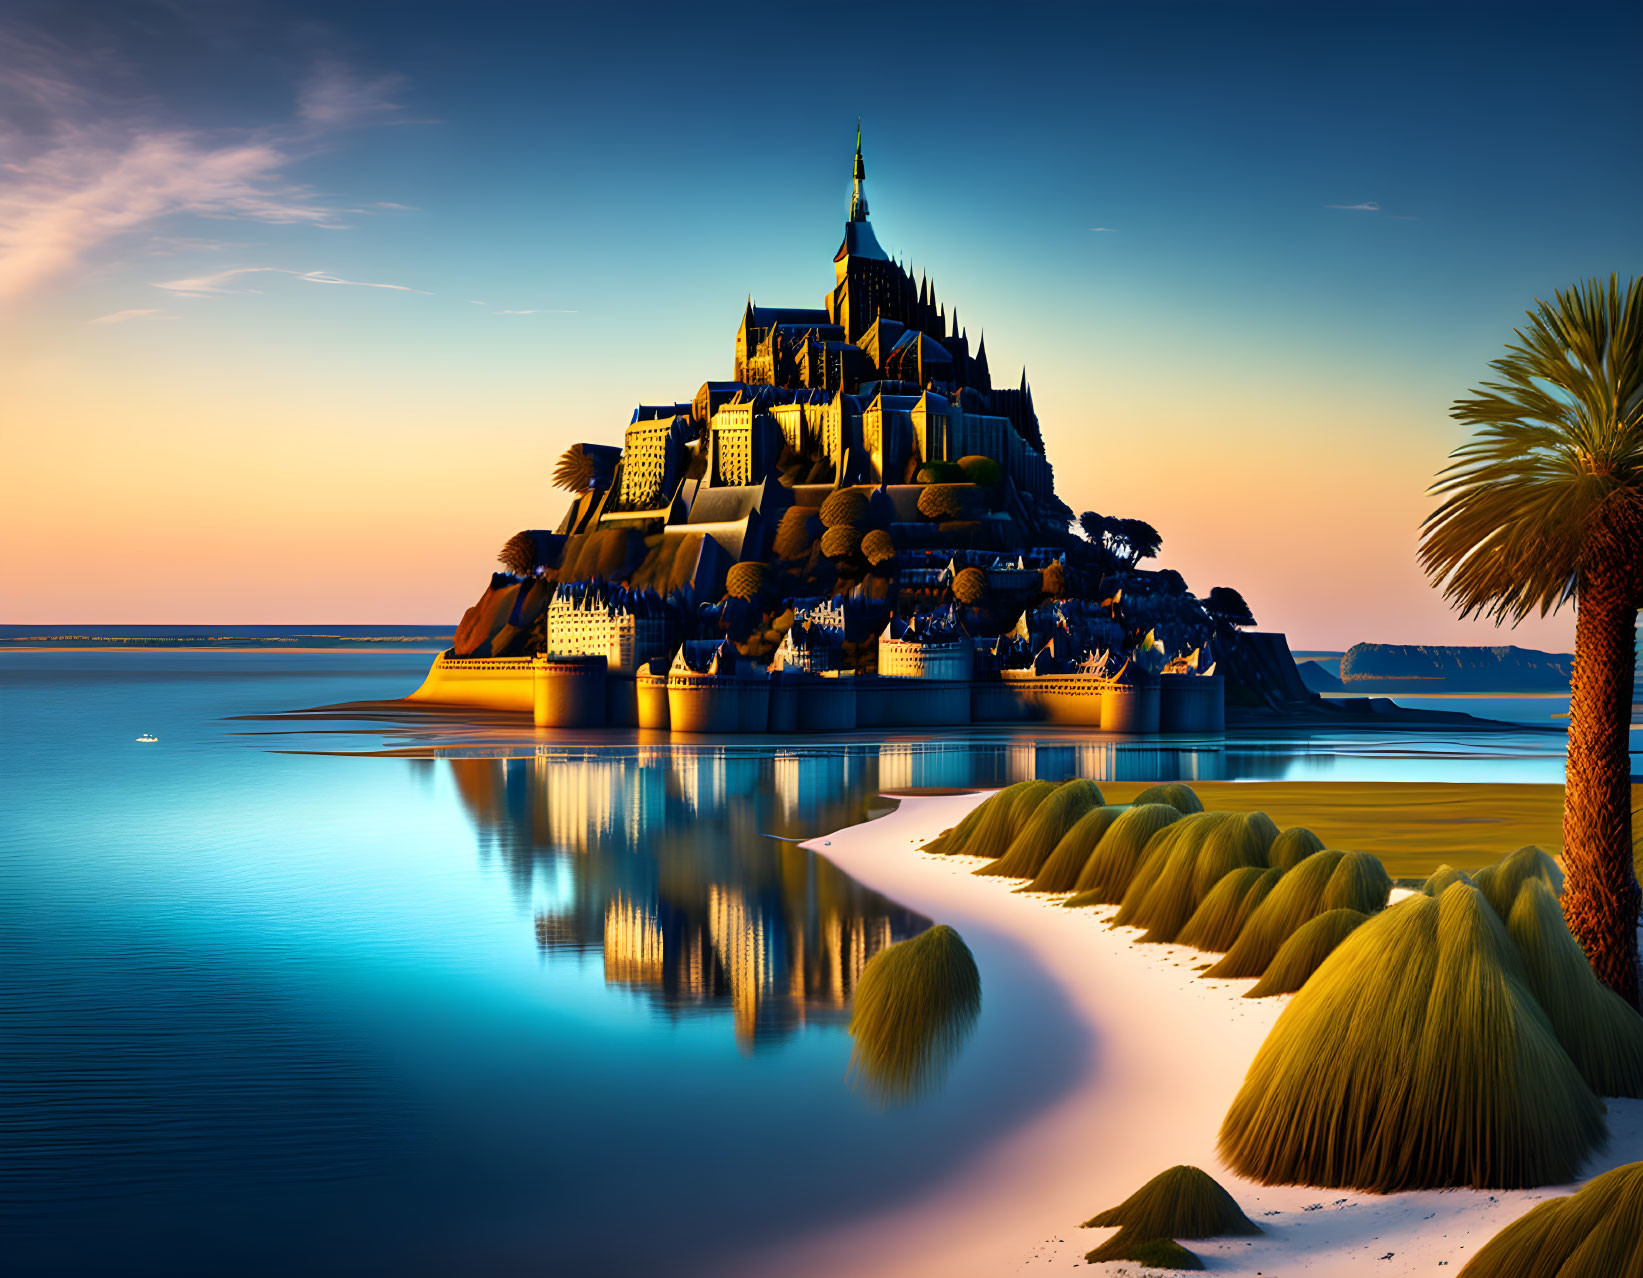 Fantastical castle on lush island with palm trees reflecting in tranquil sunset waters